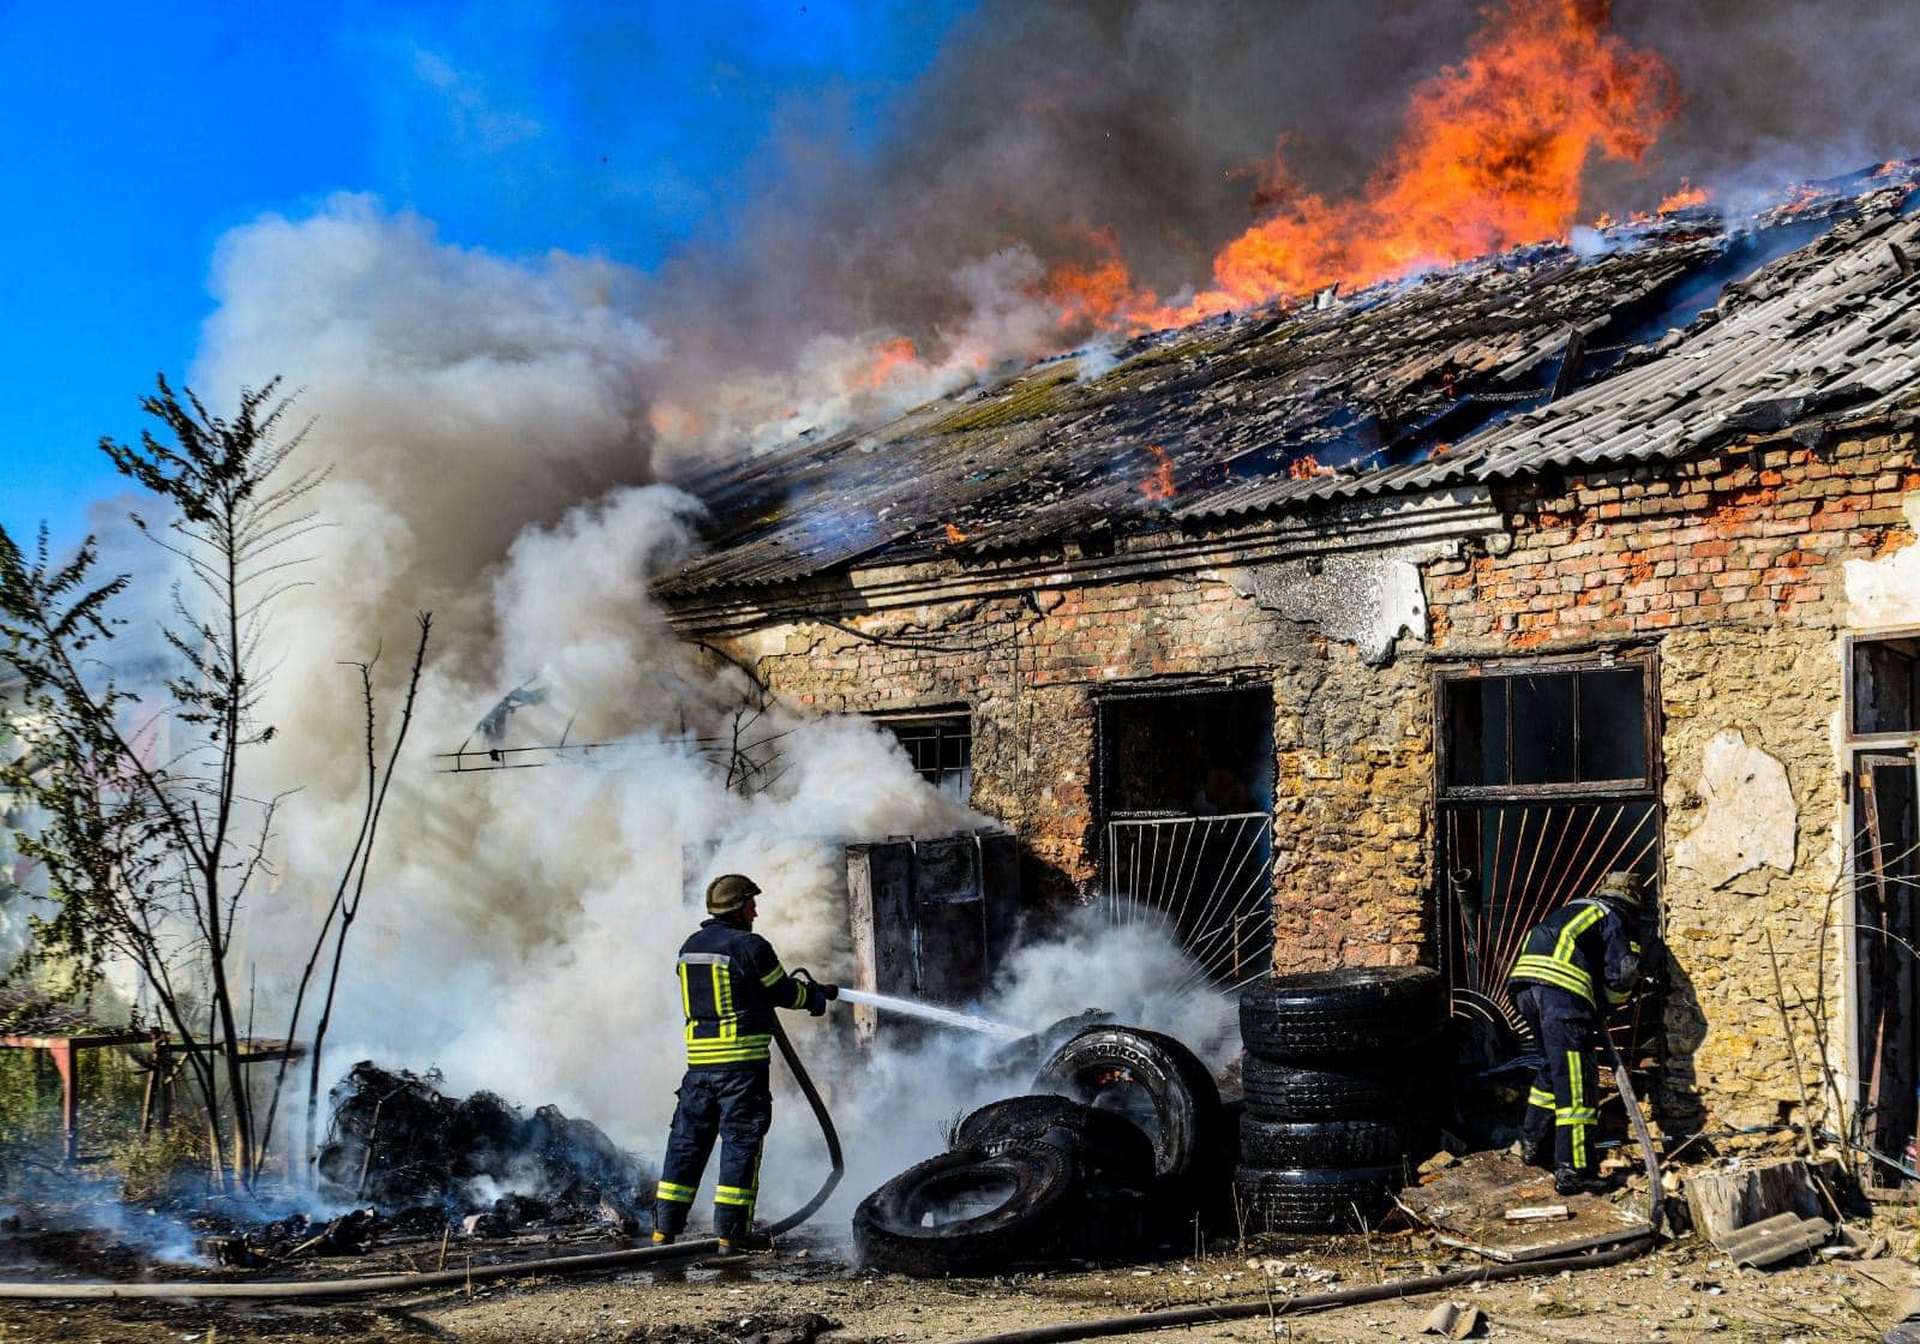 Firefighters work to extinguish a fire in a warehouse after shelling in Kherson